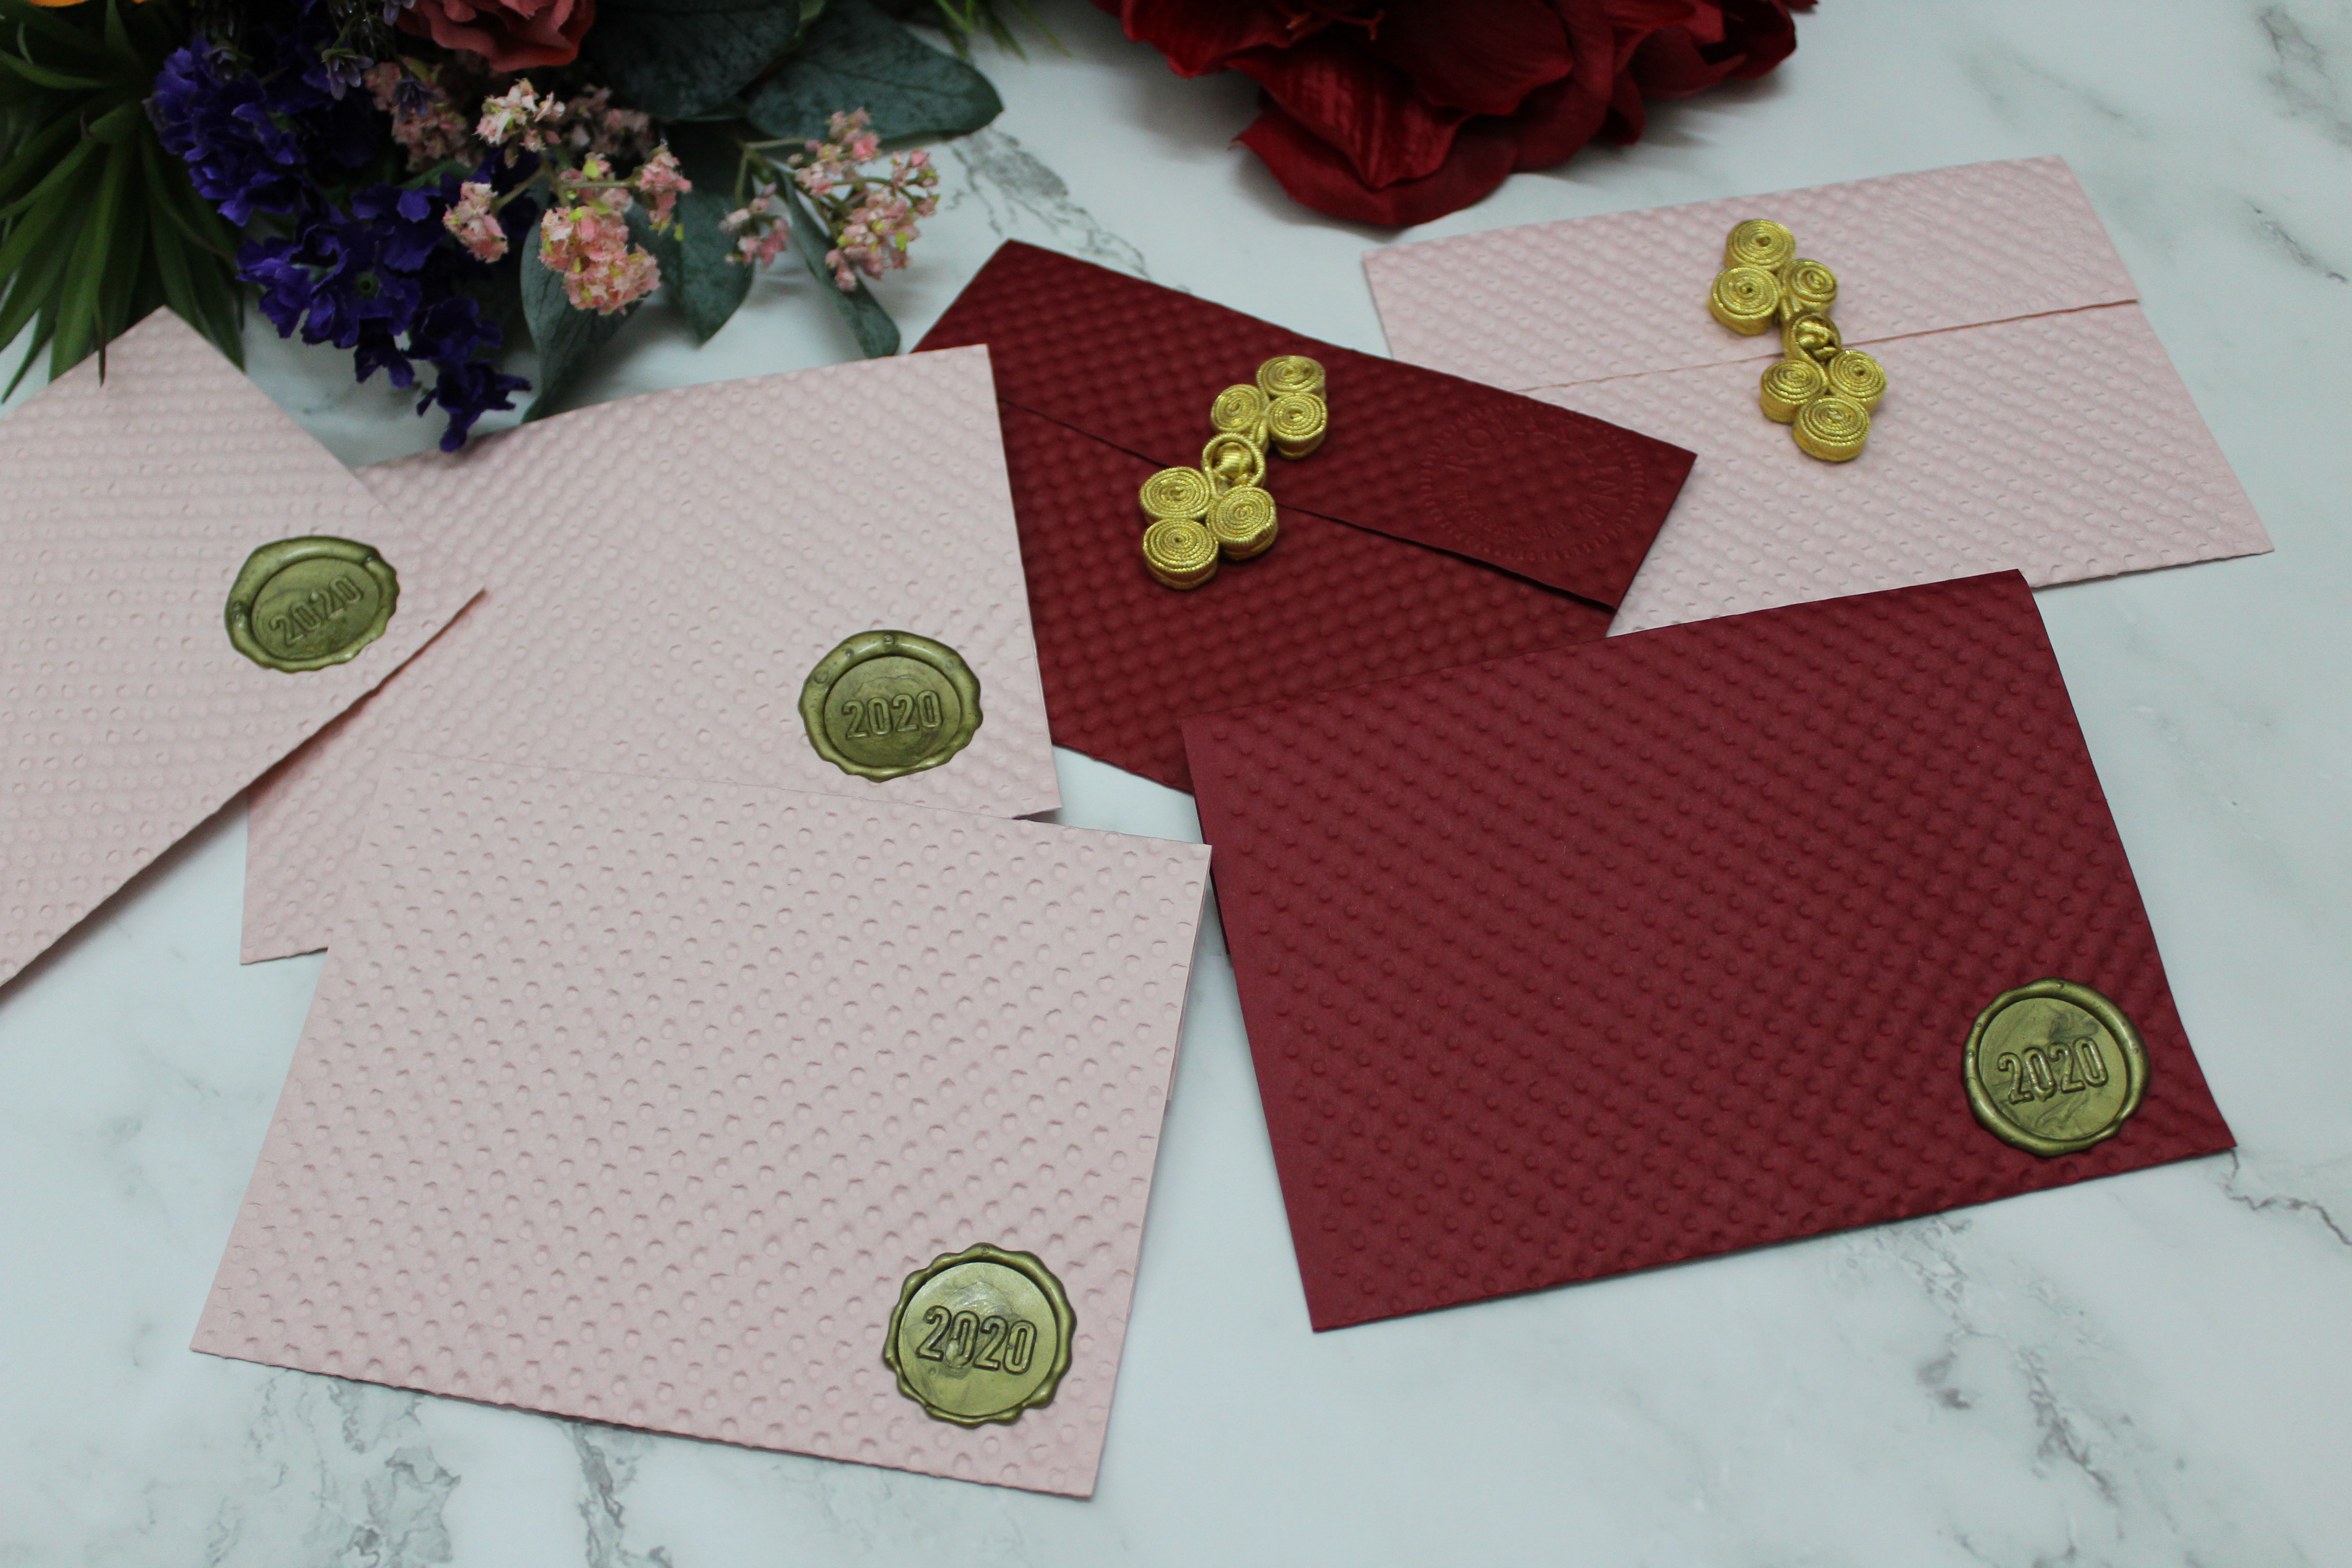 CNY 2020 Handcrafted Red Packet give away with every $15 purchase